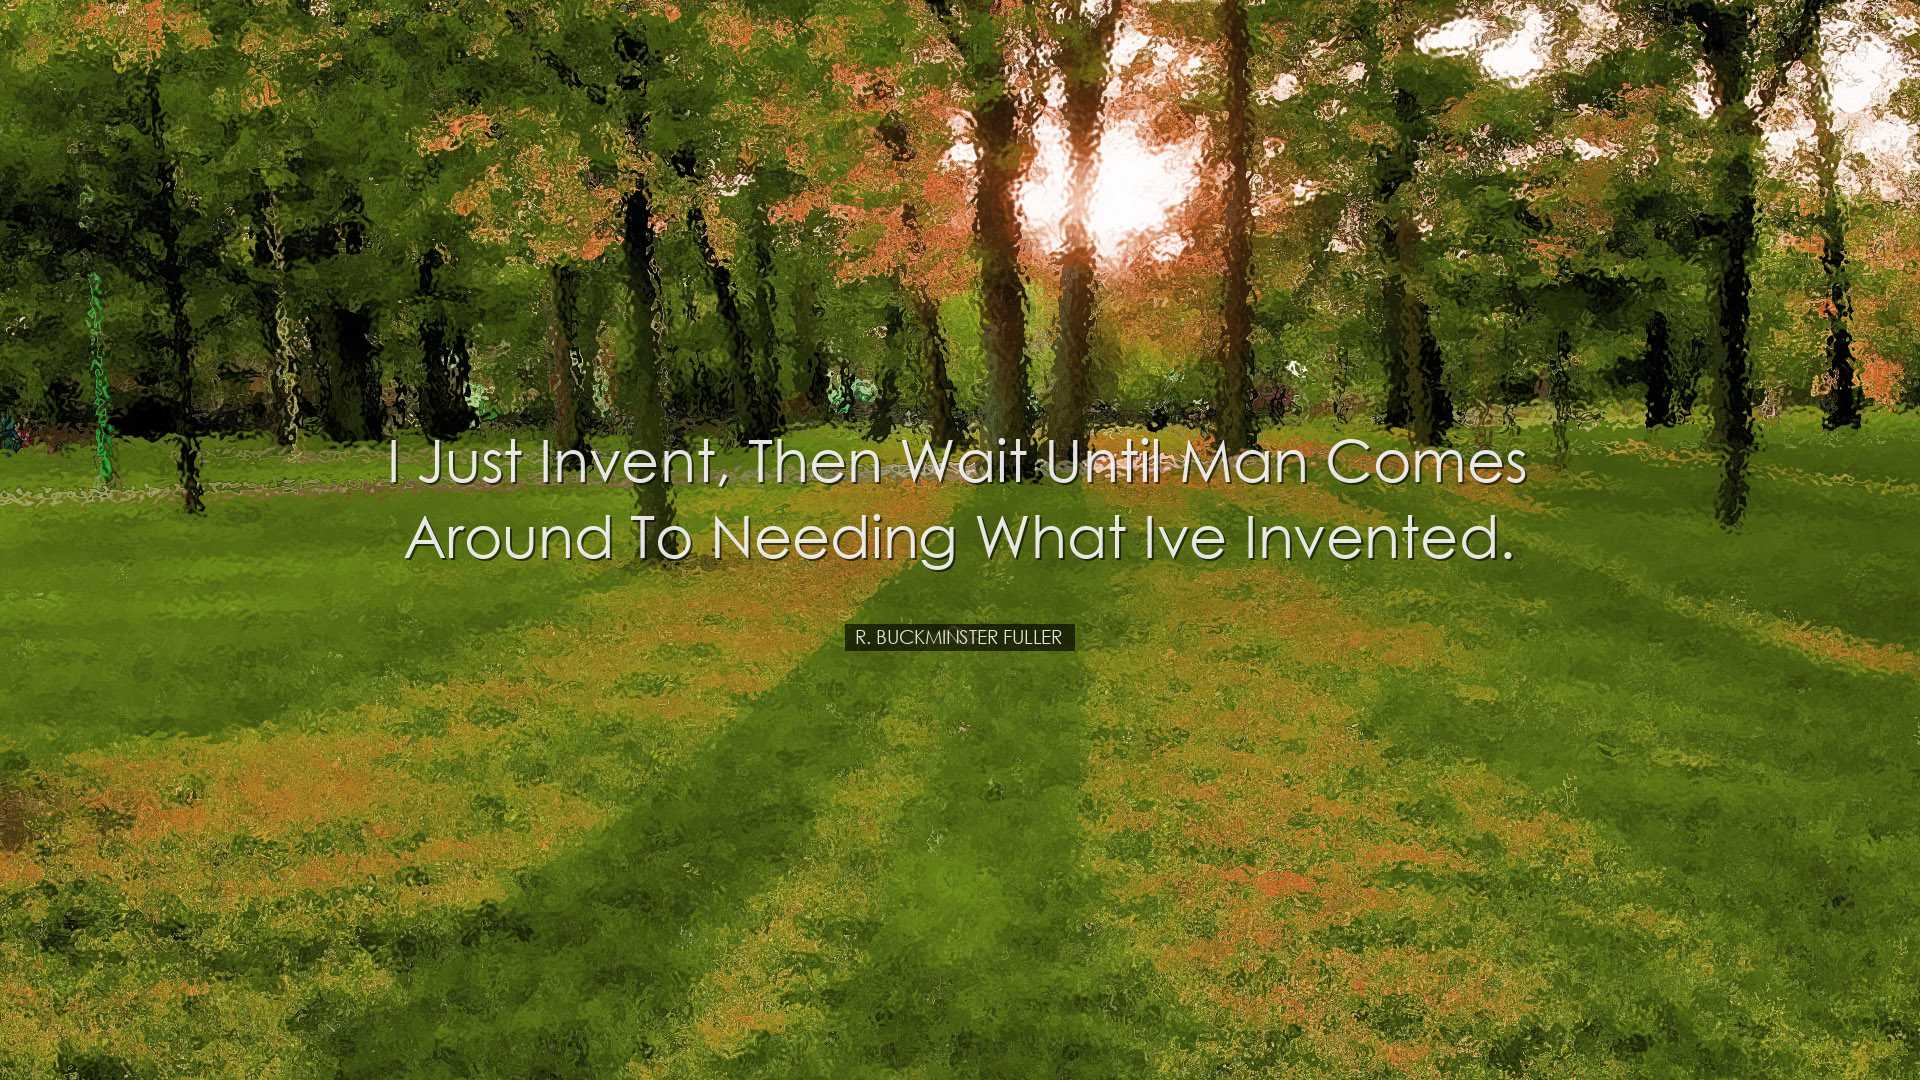 I just invent, then wait until man comes around to needing what Iv